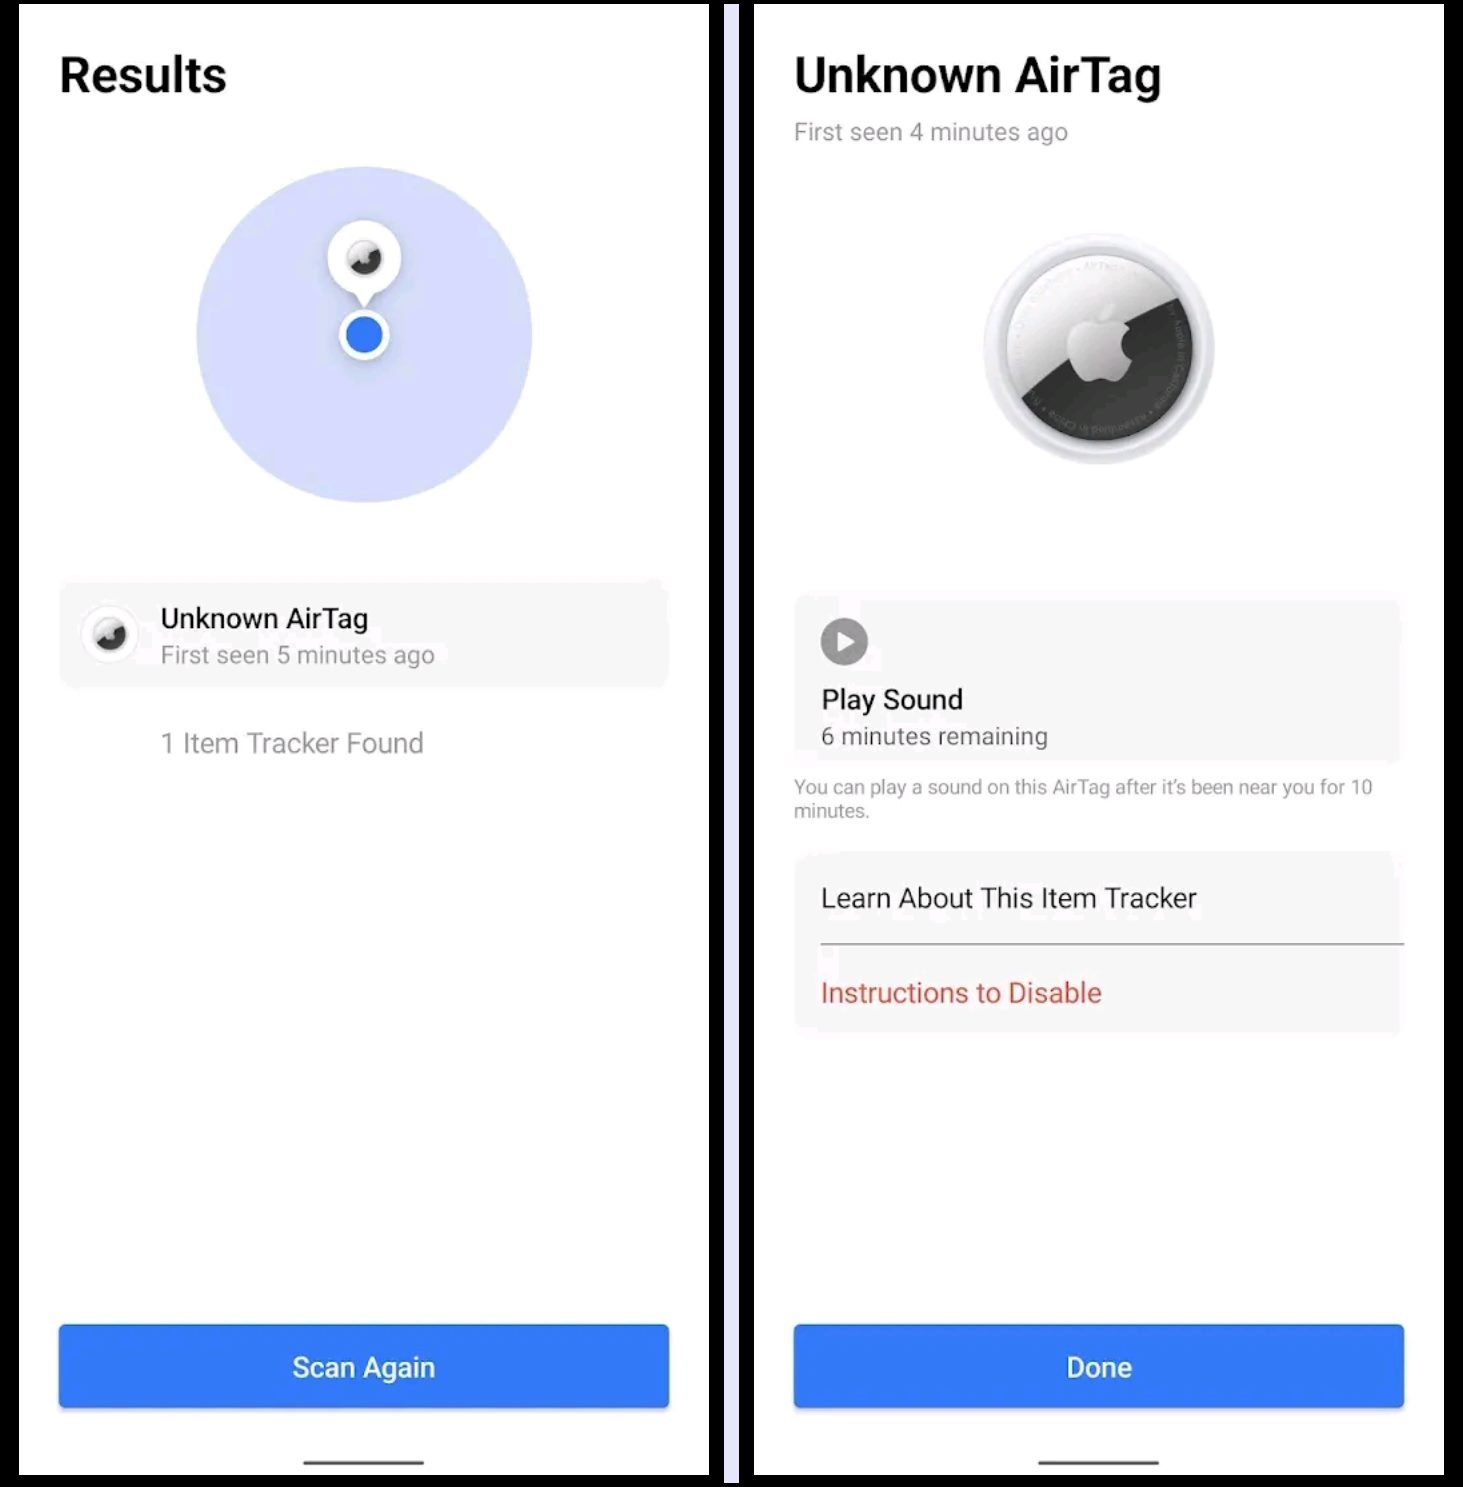 Track AirTags with Android: This image shows 2 screenshots of the Tracker Detect app - One displaying the Tracker Detect app's Results screen, another displaying a completed scan result which shows an unknown AirTag detected.